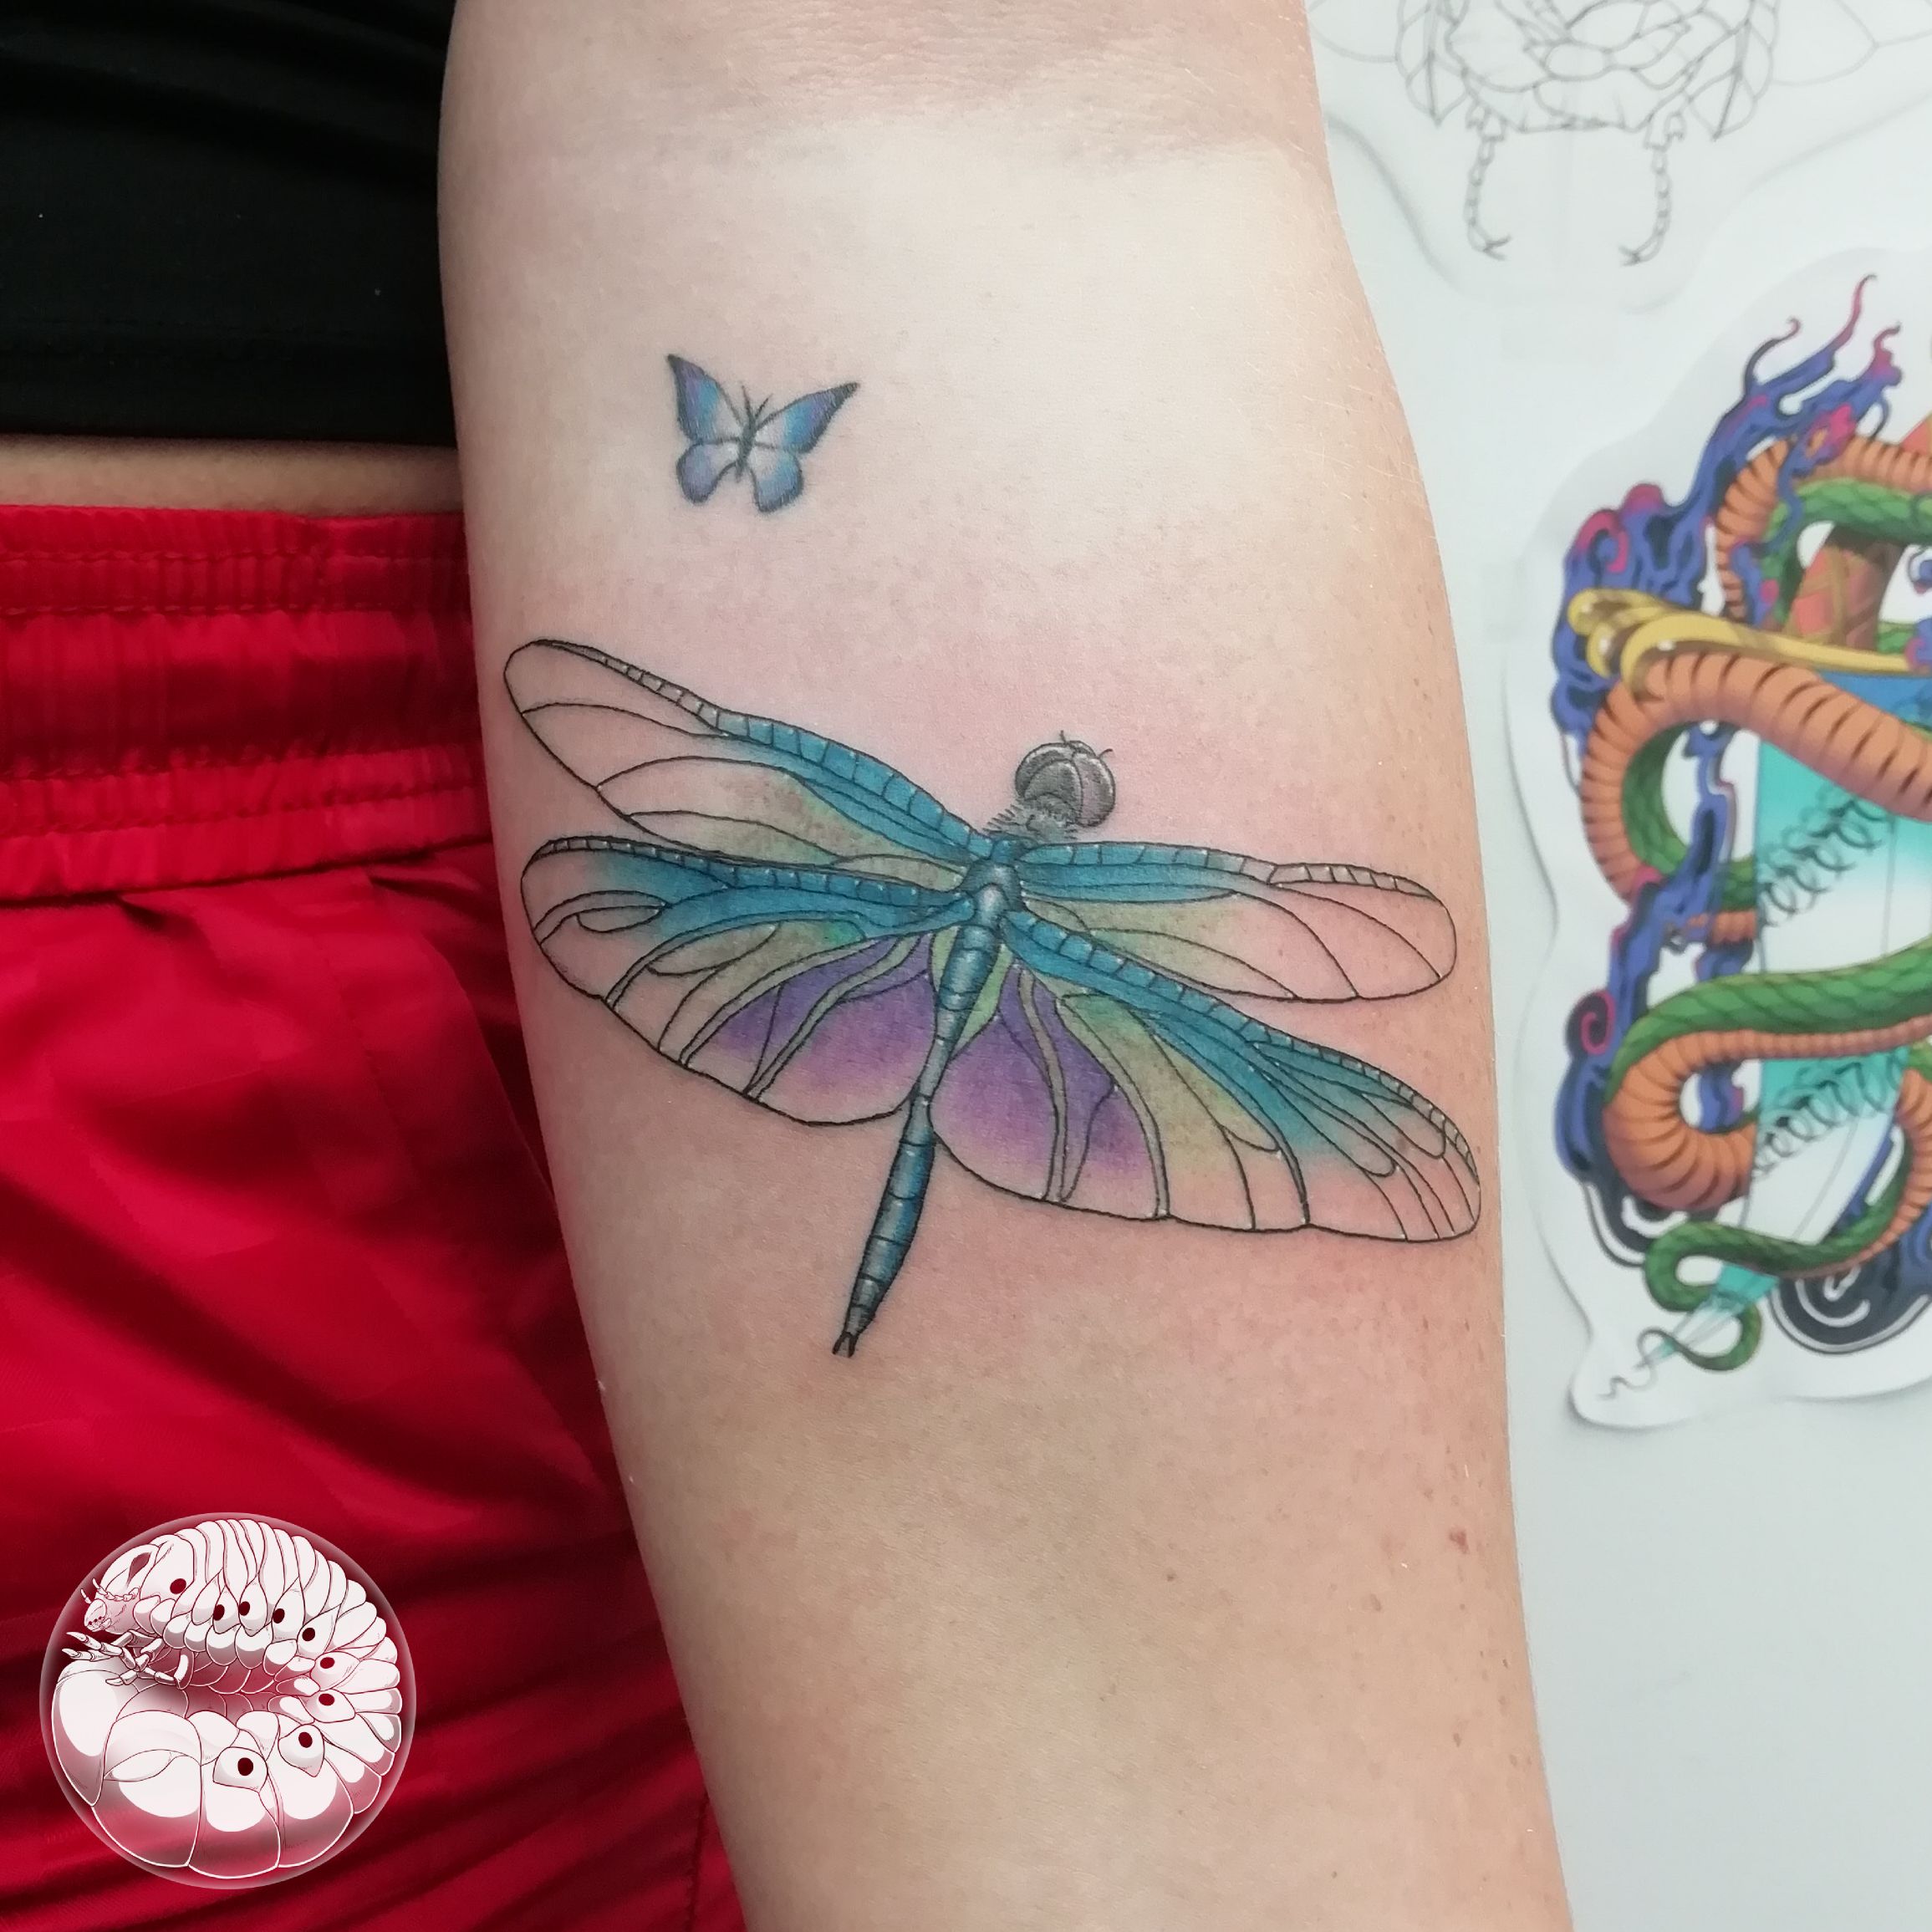 101 Dragonfly Tattoo Ideas  Best Rated Designs in 2020  LaptrinhX  News